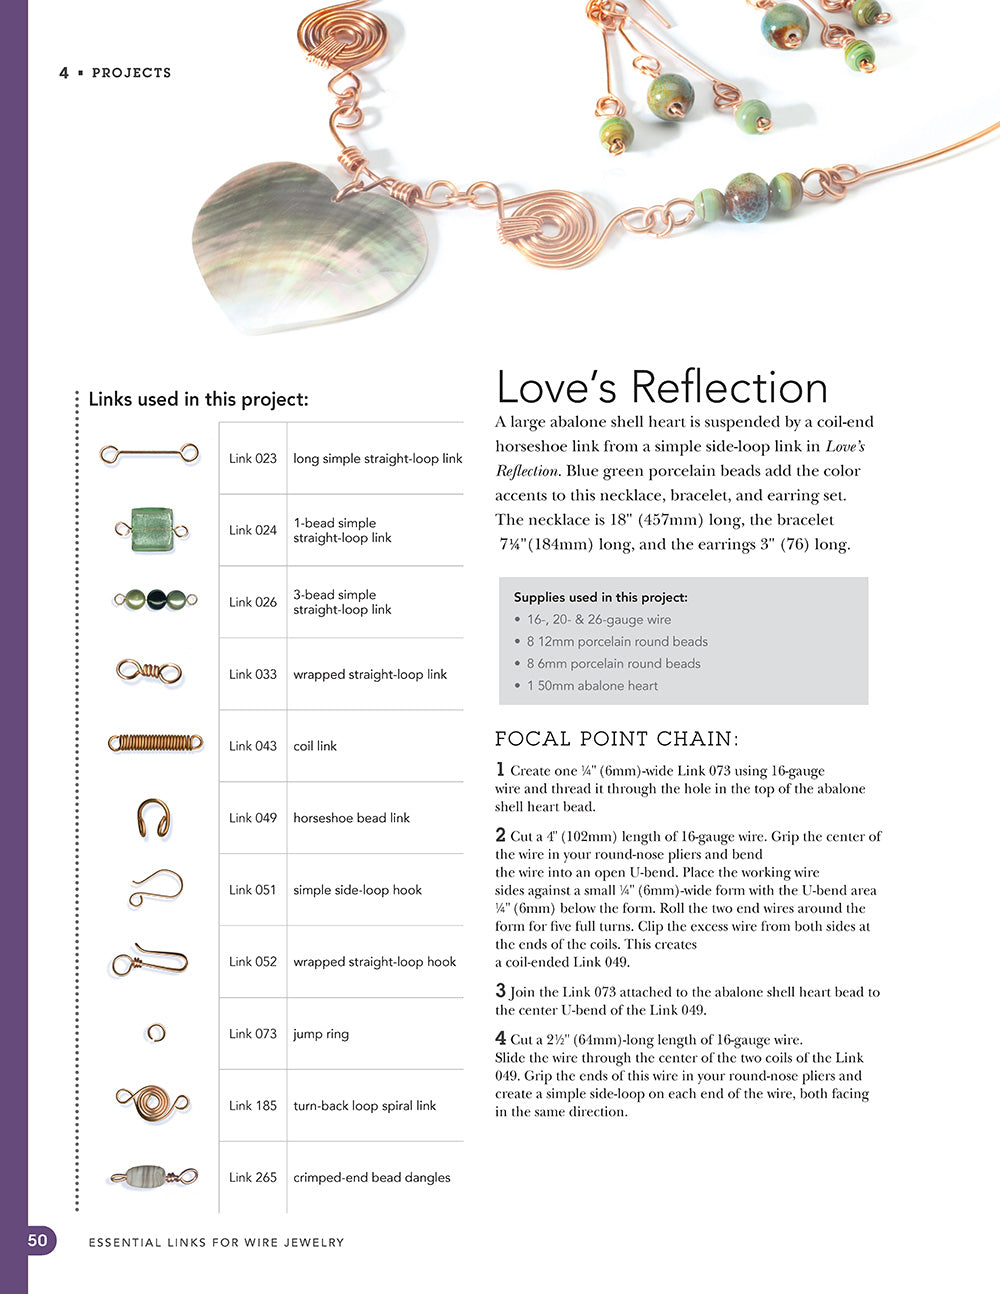 Essential Links for Wire Jewelry, 3rd Edition